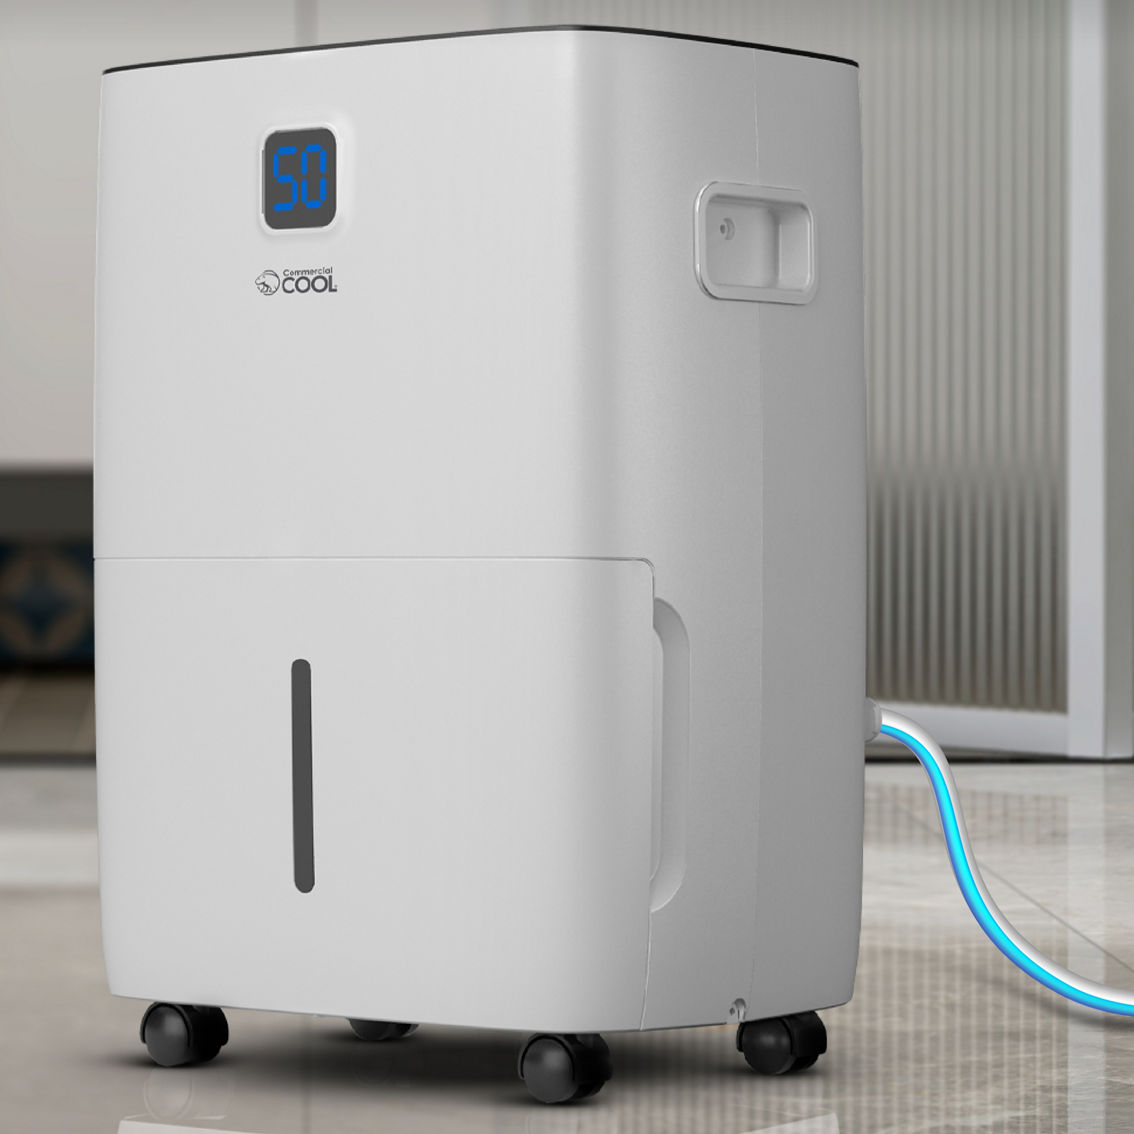 Commercial Cool 25 pint Portable Dehumidifier - Image 6 of 7